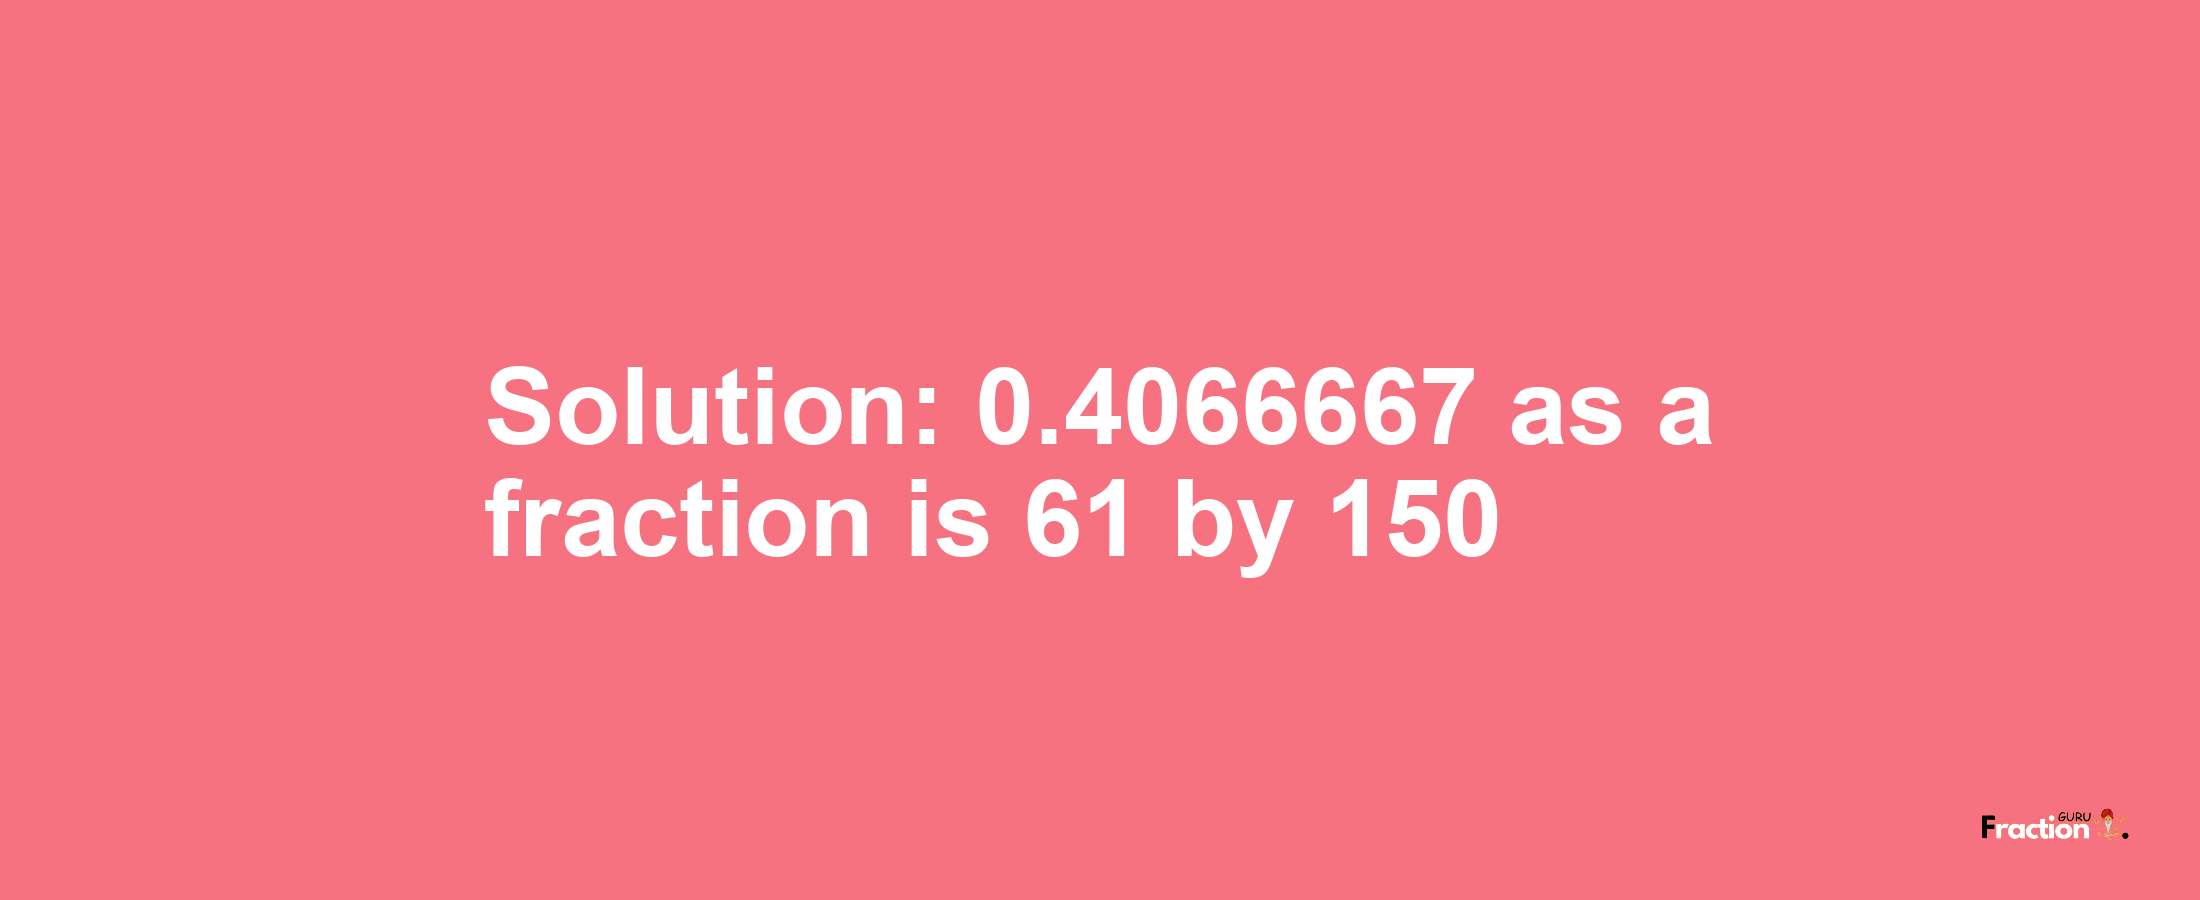 Solution:0.4066667 as a fraction is 61/150